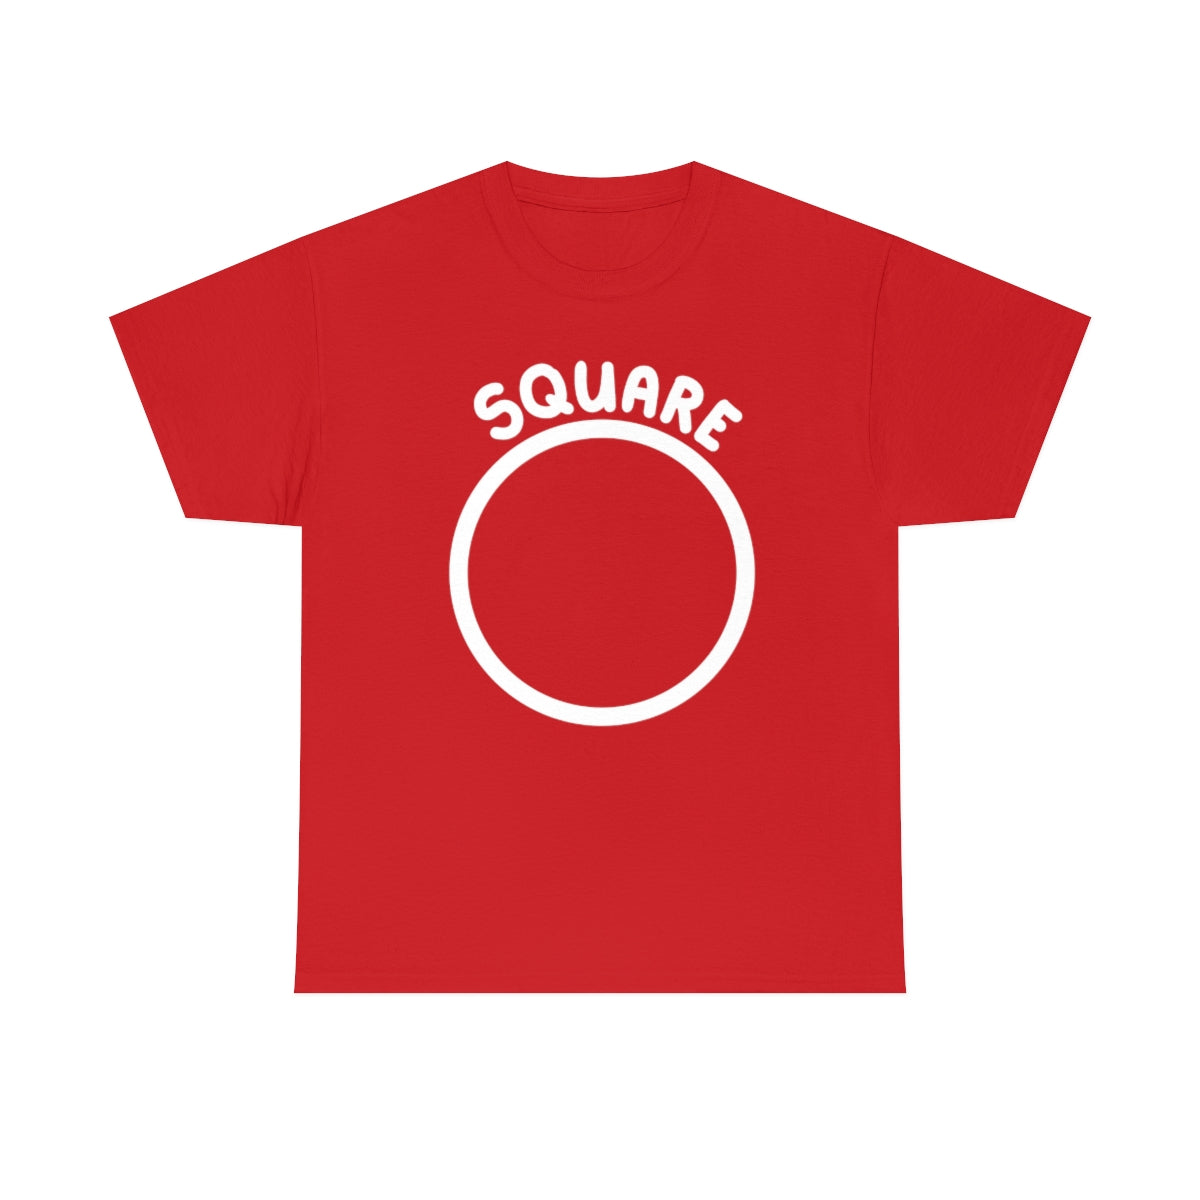 Square - T-Shirt T-Shirt Ooka Red S 